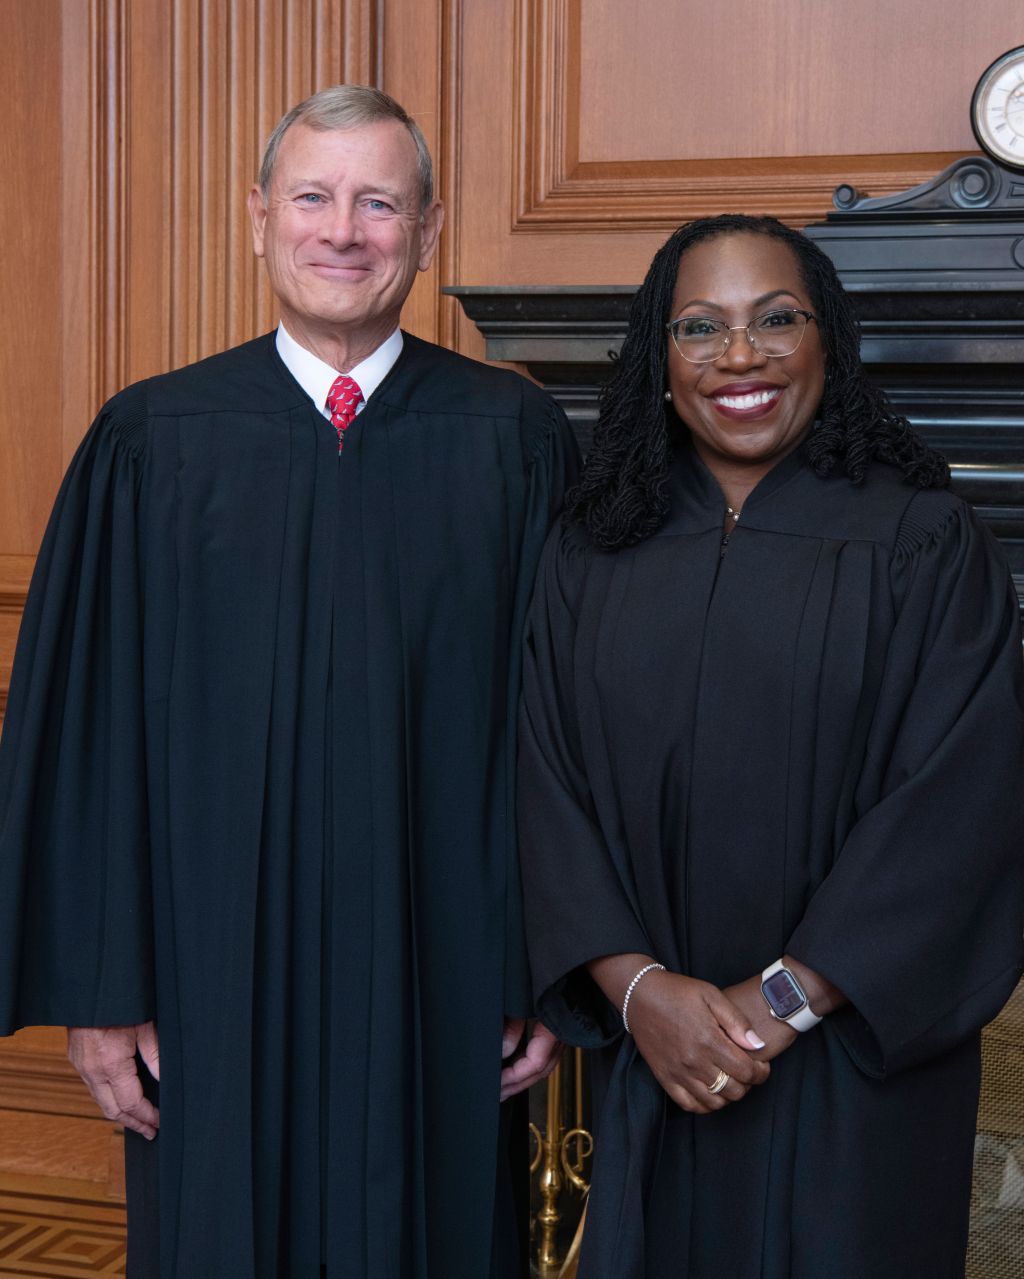 Ketanji Brown Jackson officially joins Supreme Court in historic investiture ceremony